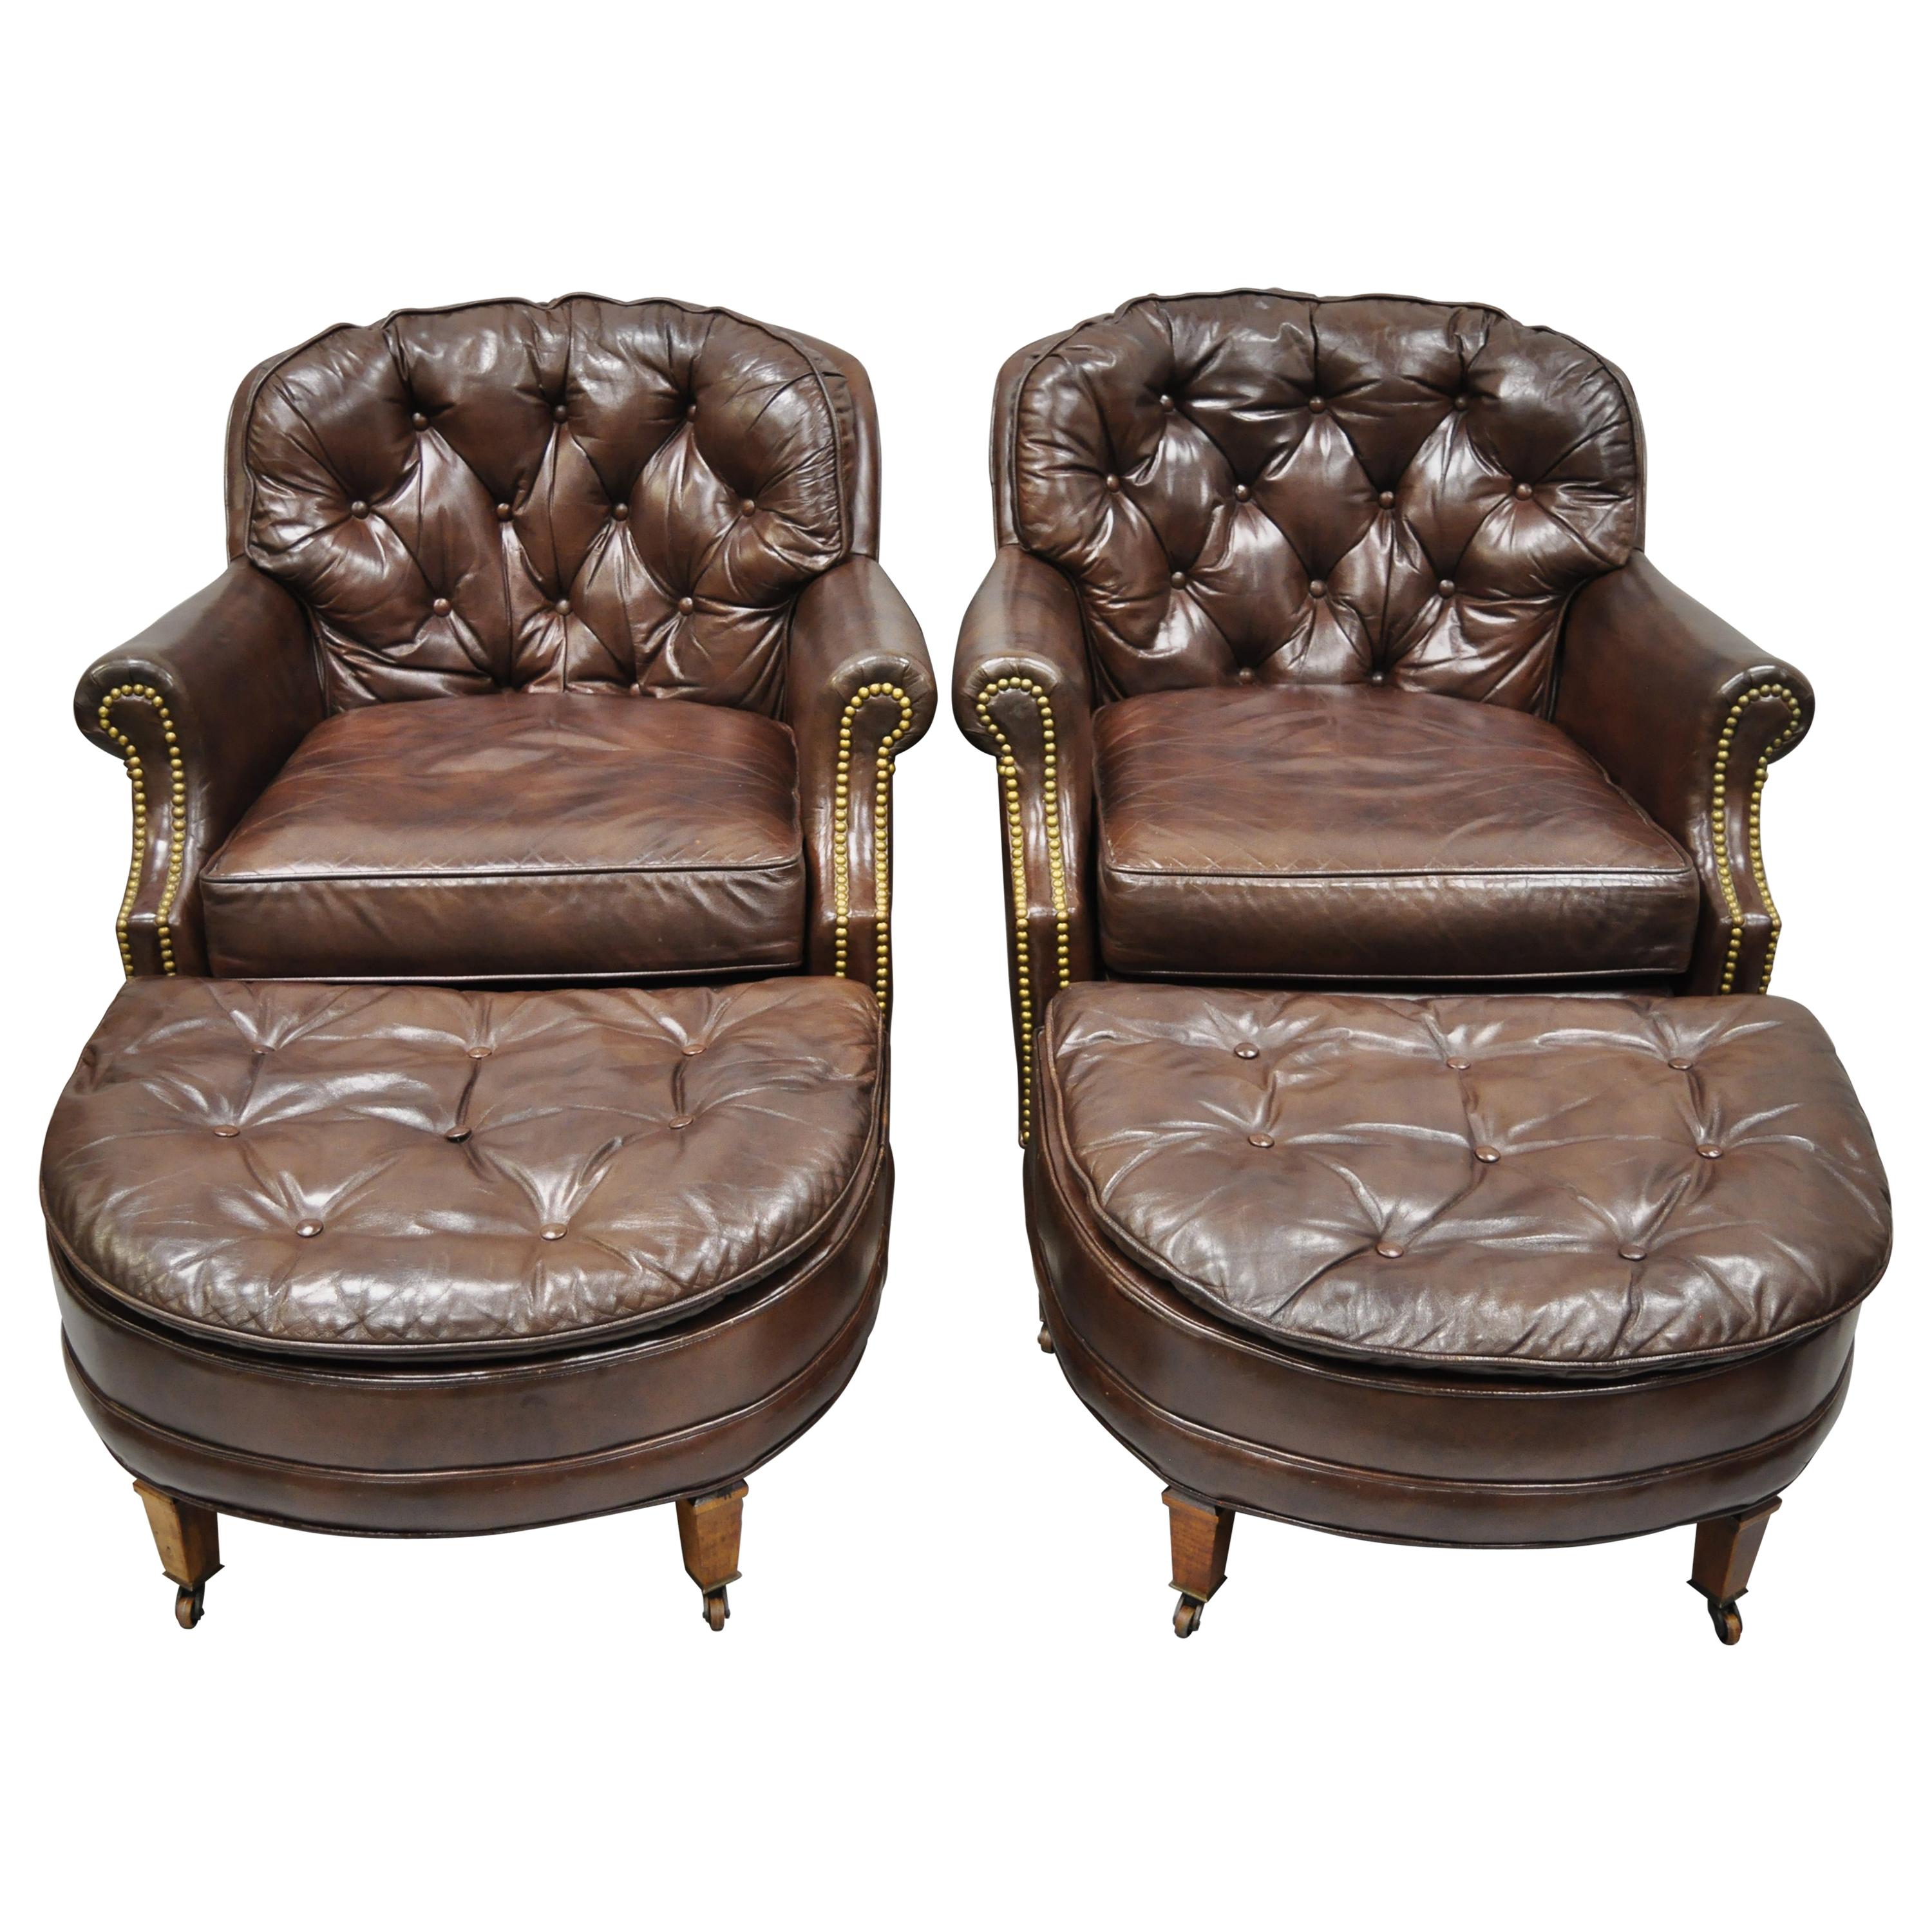 Century Furniture Co Brown Leather Chesterfield Club Lounge Chairs Ottomans Pair